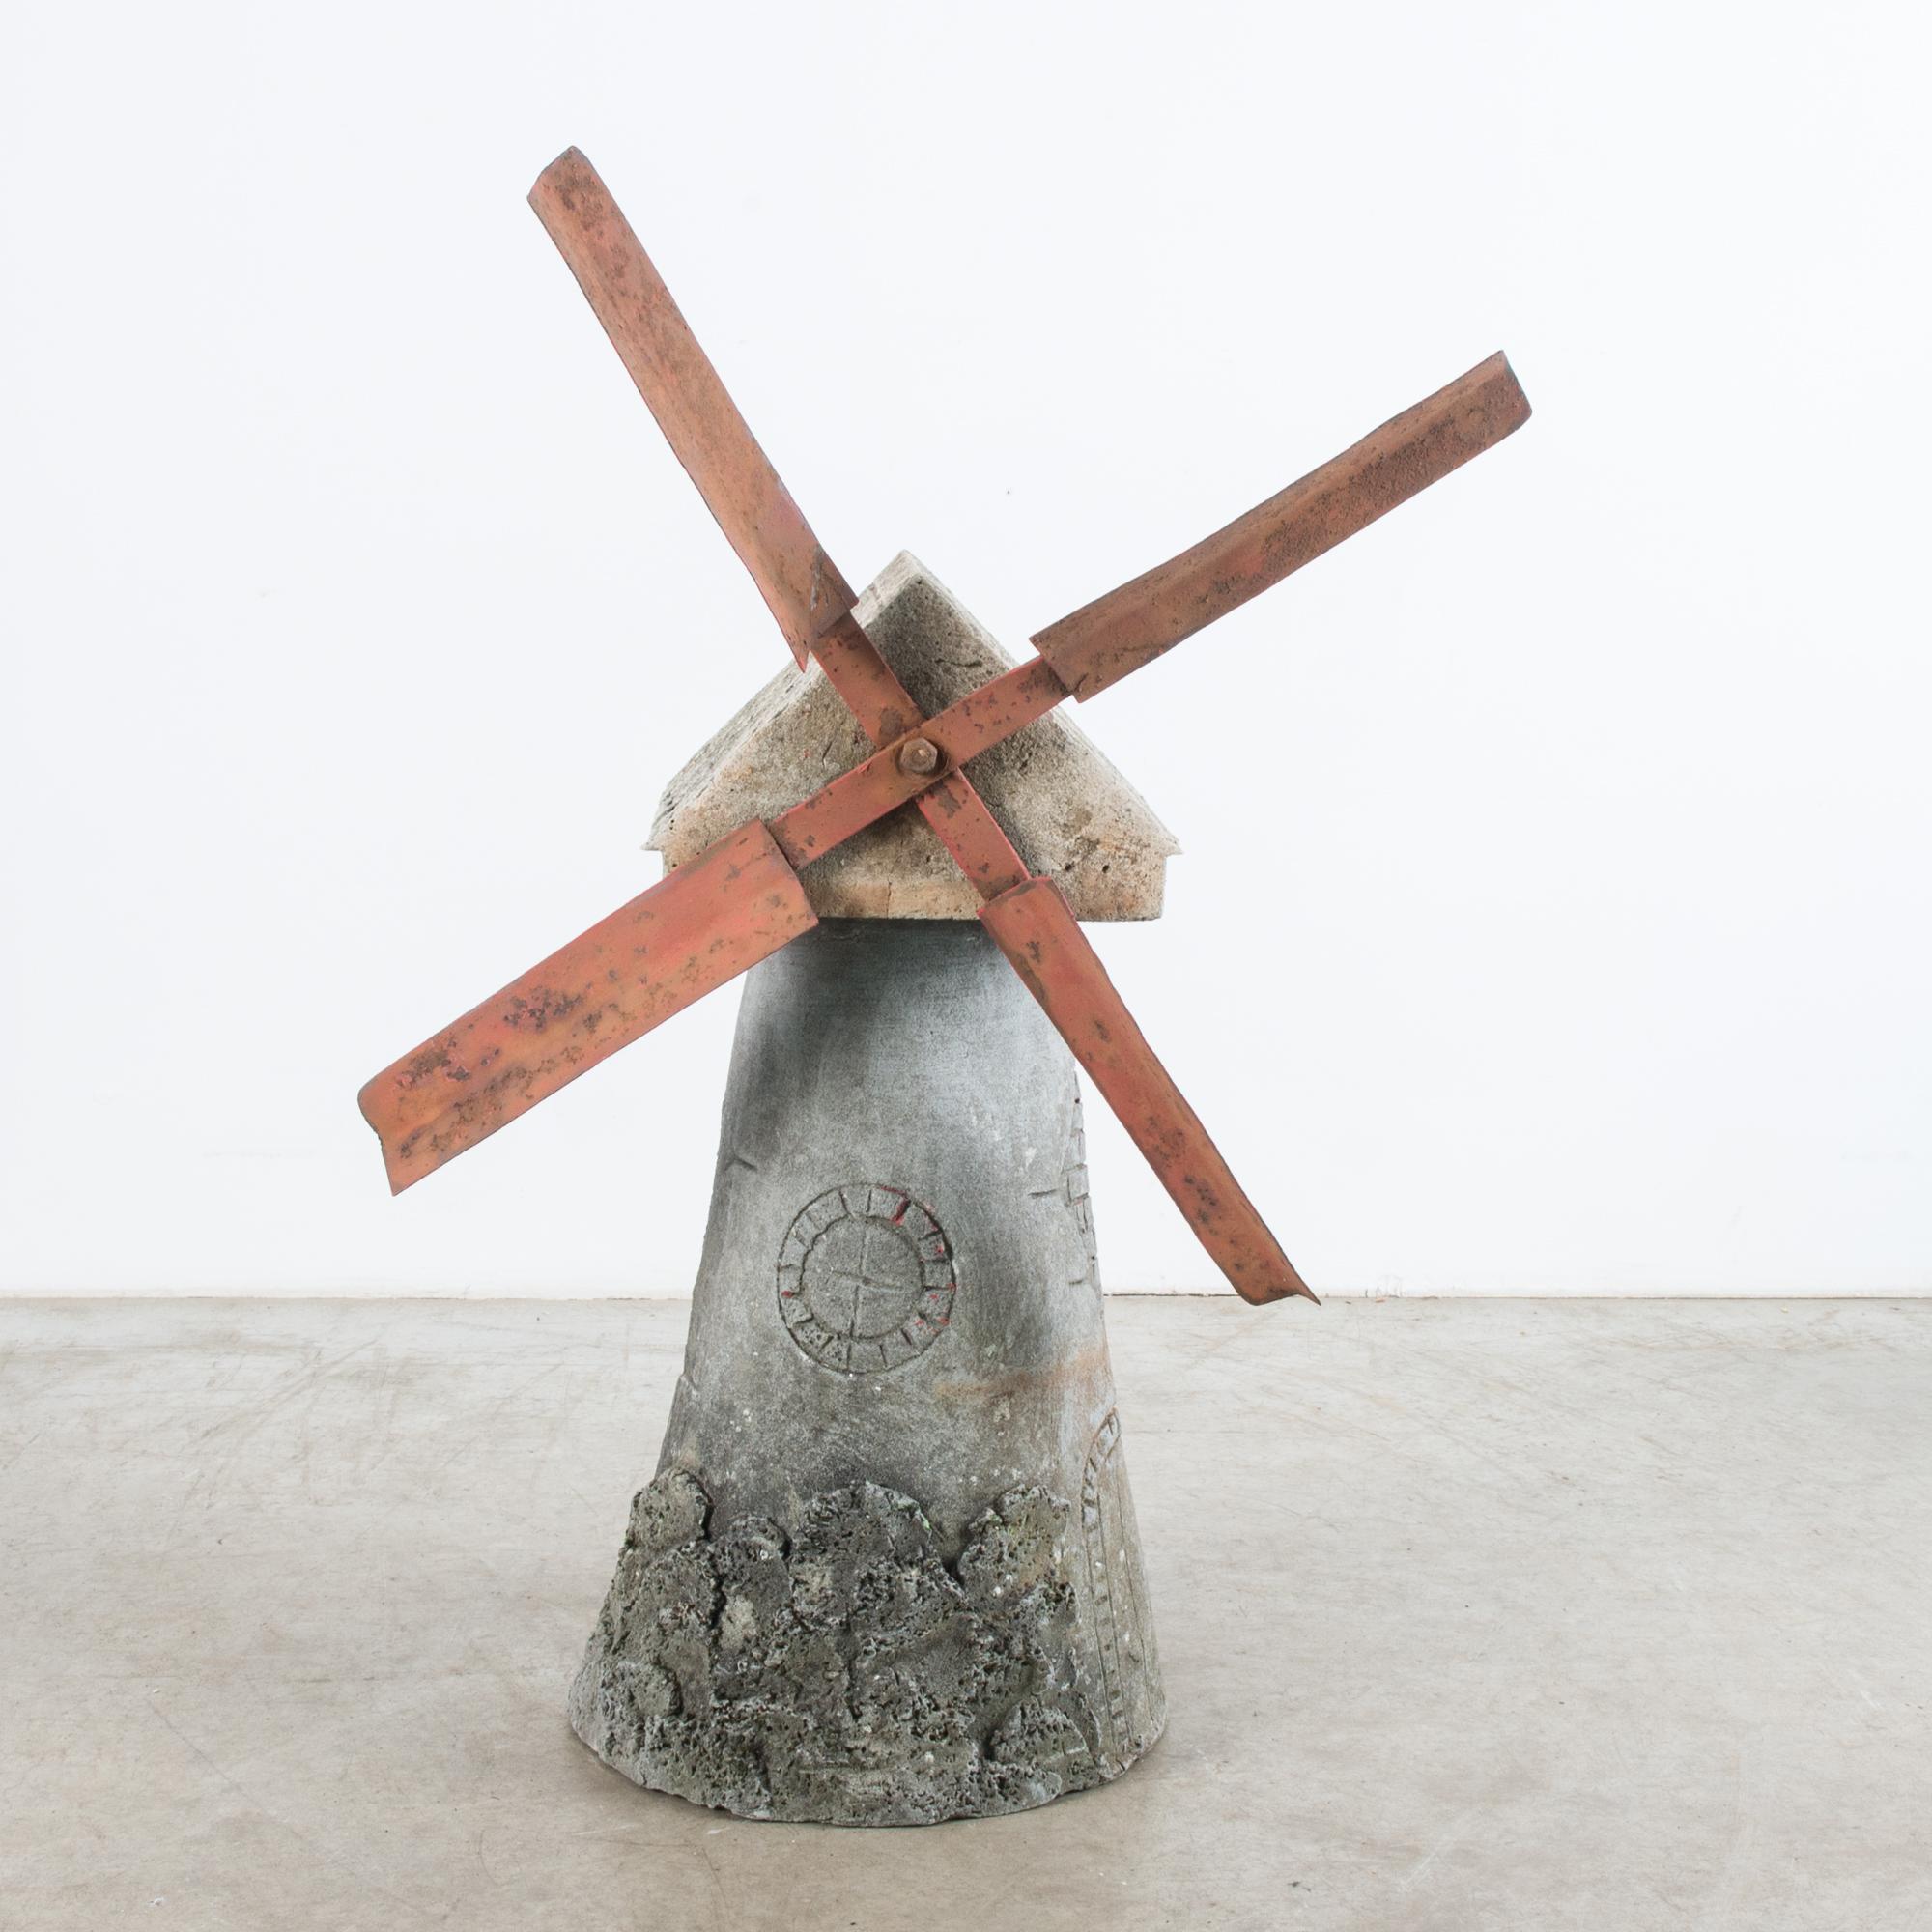 This concrete windmill ornament was made in Belgium, circa 1960. It is a delightfully charming piece, with its handcrafted quality and carvings of tiles on the roof and a door at the bottom. Red metal pieces with a weathered patina are assembled in